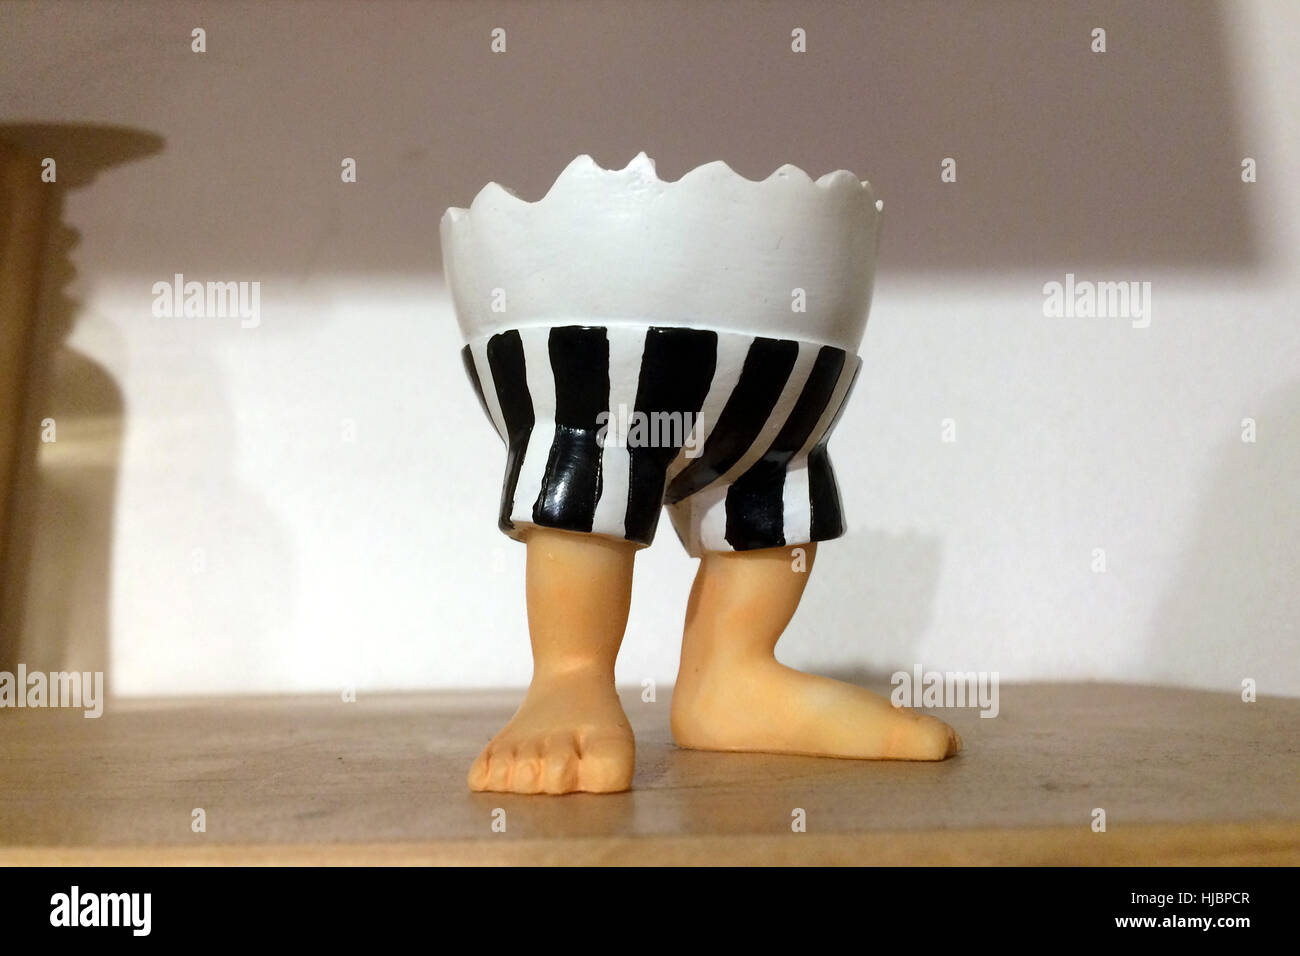 Egg cup in shape of broken egg shell with two human legs. Kitsch example. Stock Photo